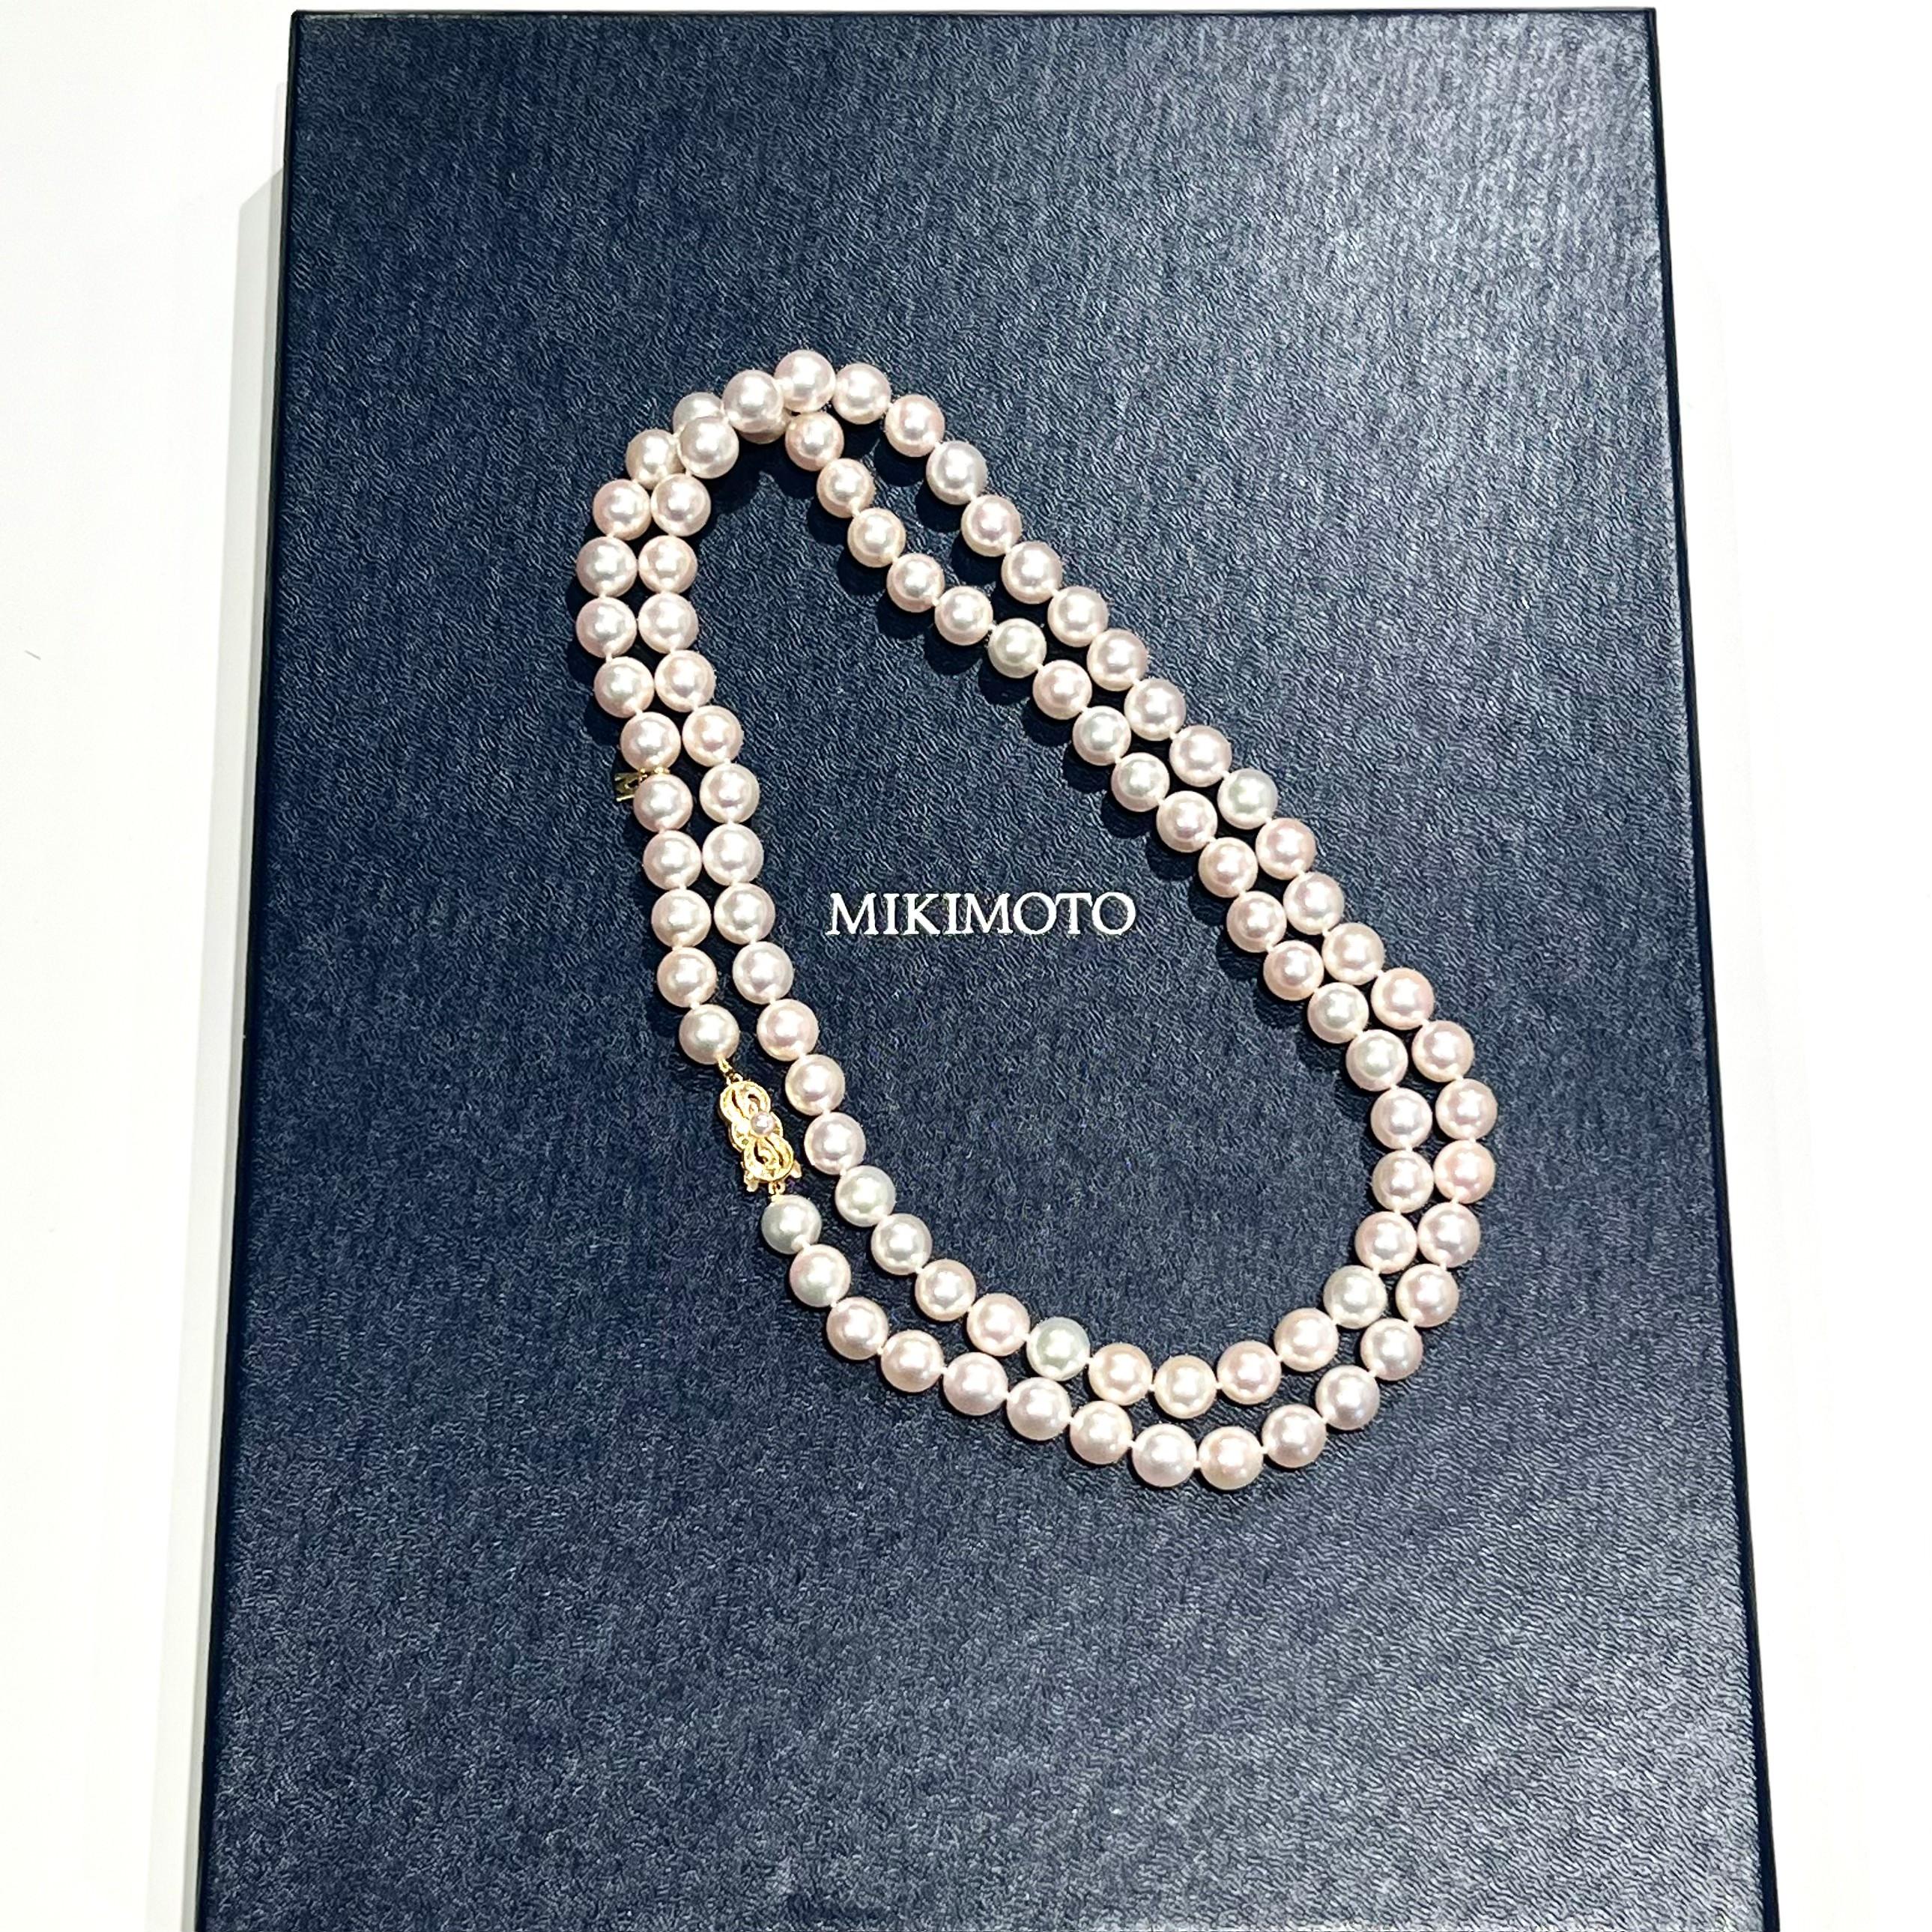 Round Cut Mikimoto Estate Akoya Pearl Necklace 18k Gold Certified For Sale